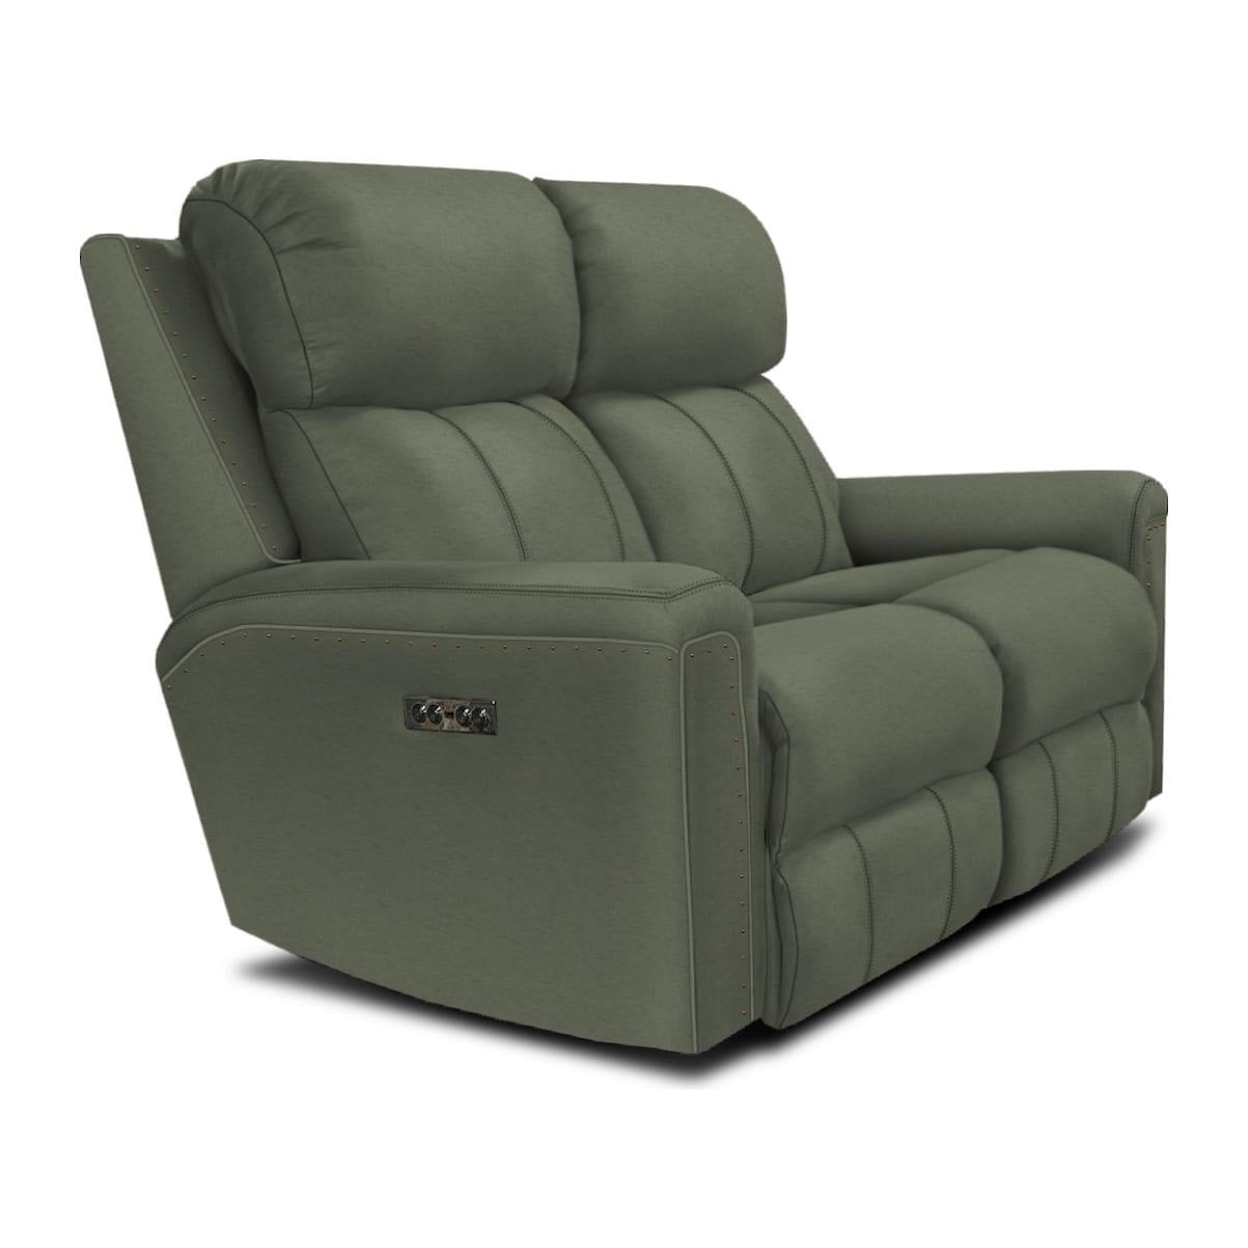 Tennessee Custom Upholstery EZ1C00/H/N Series EZ1C00H Double Reclining Loveseat with Nails